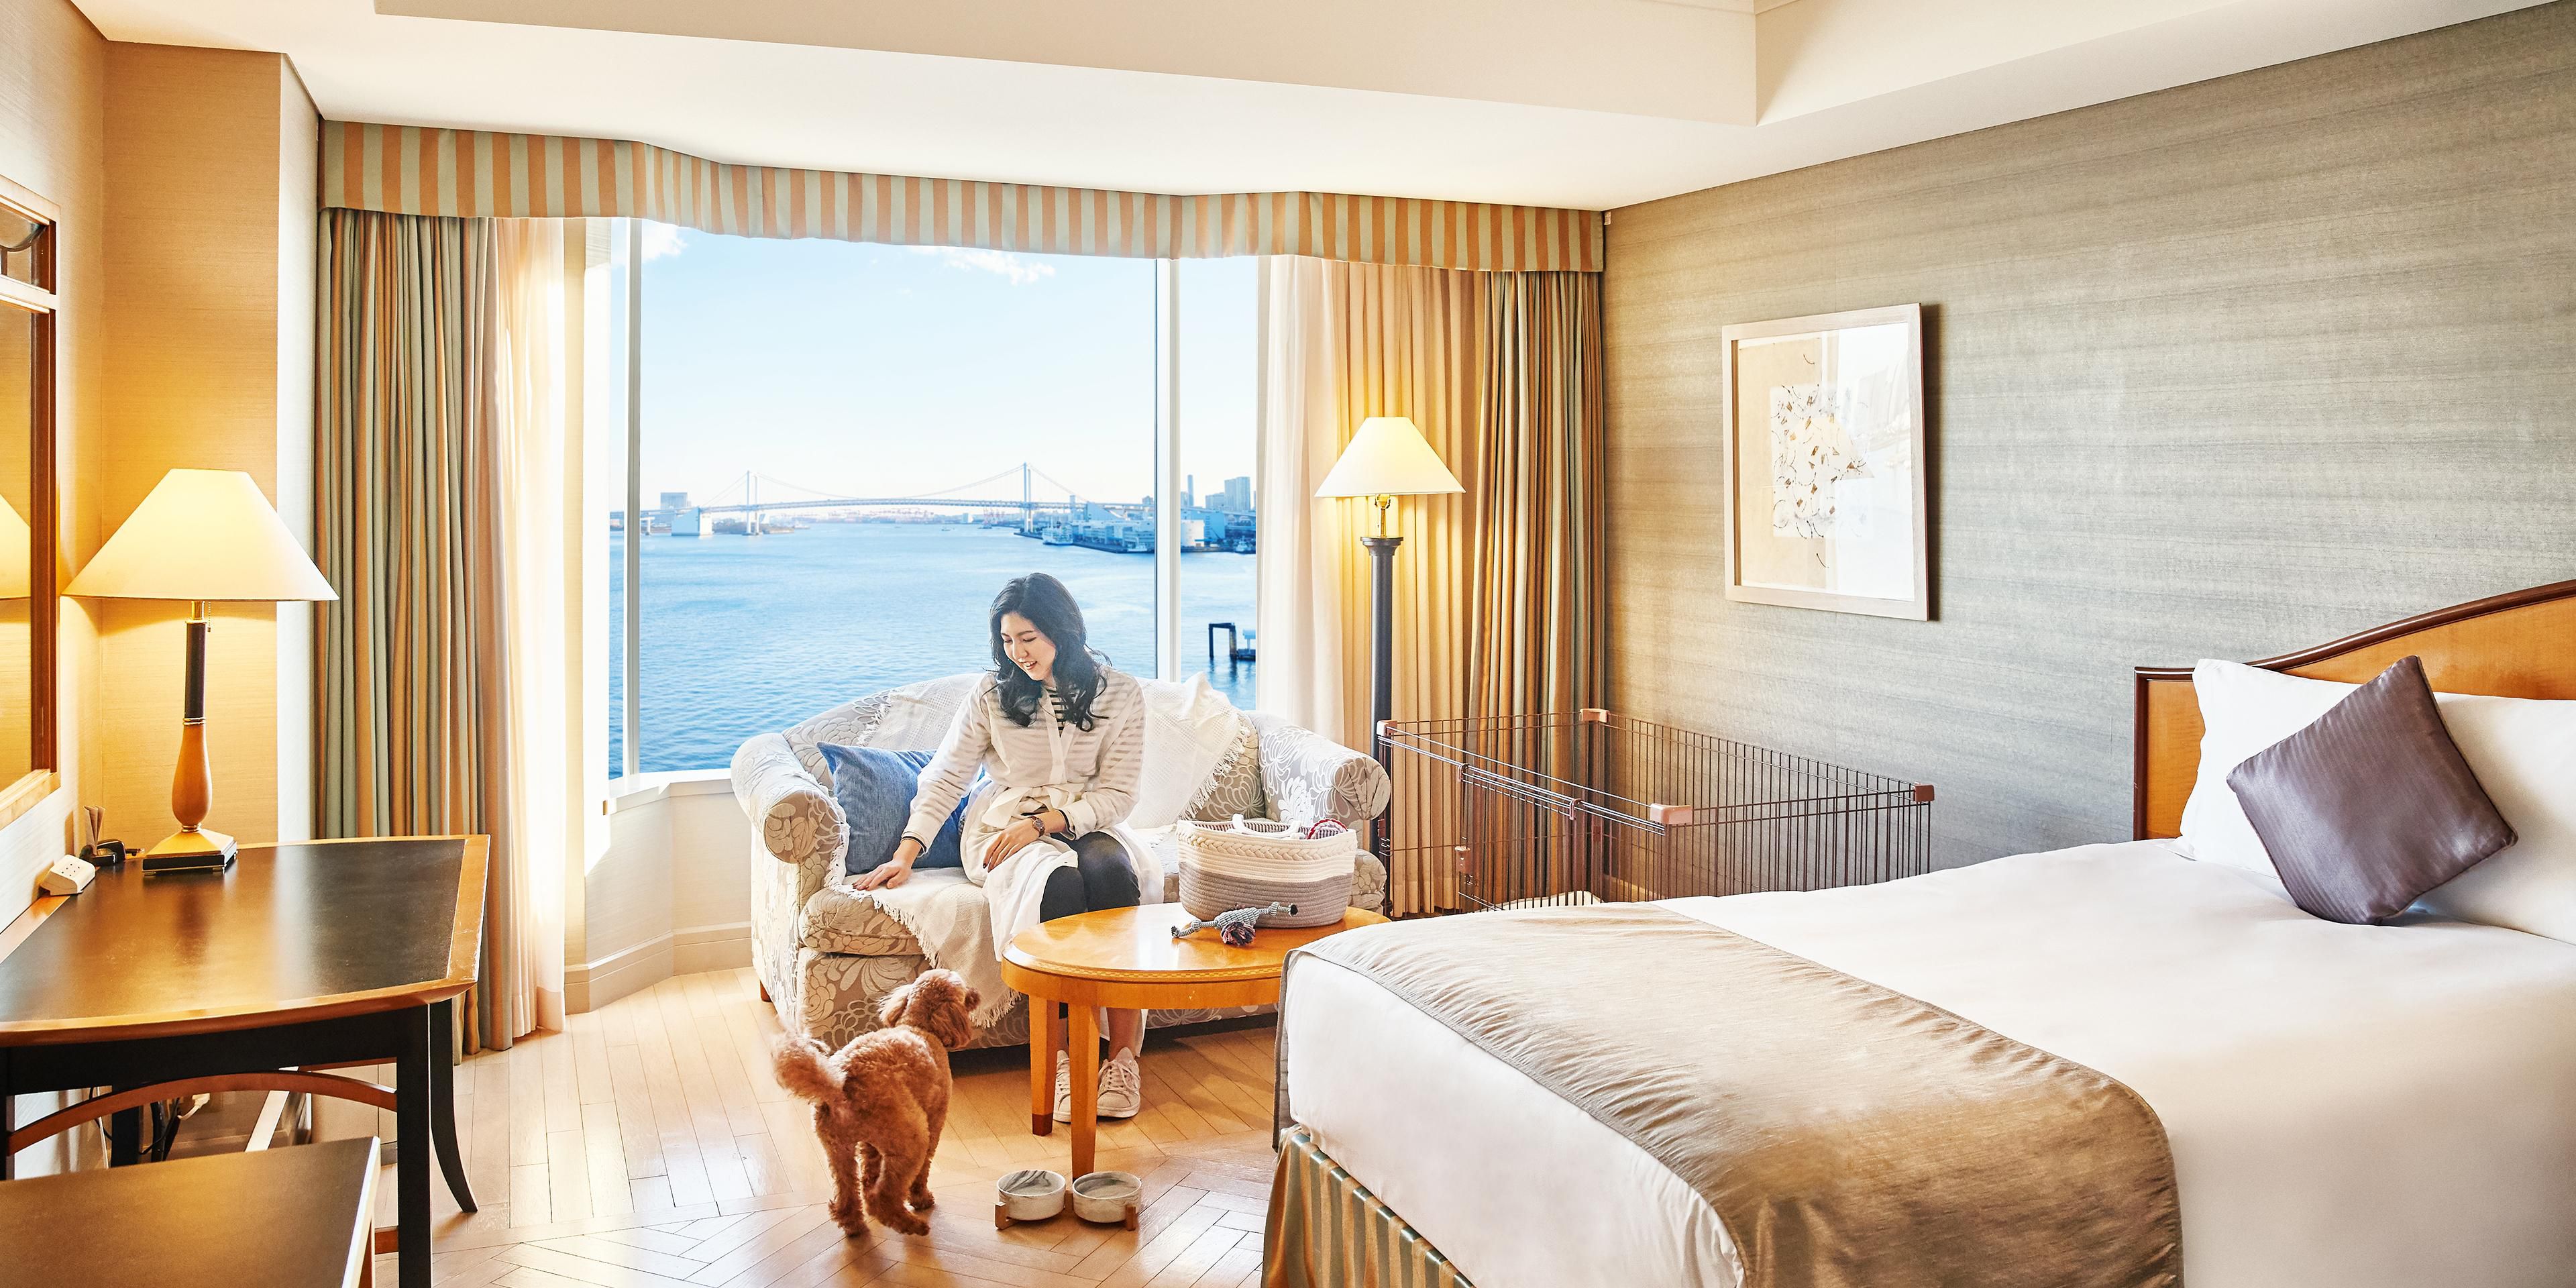 InterContinental Tokyo Bay offers a dog-friendly accommodation plan, which includes complementary dog treat and a special guest room even a dog lounge where you can enjoy your stay at our hotel with your beloved family dog.